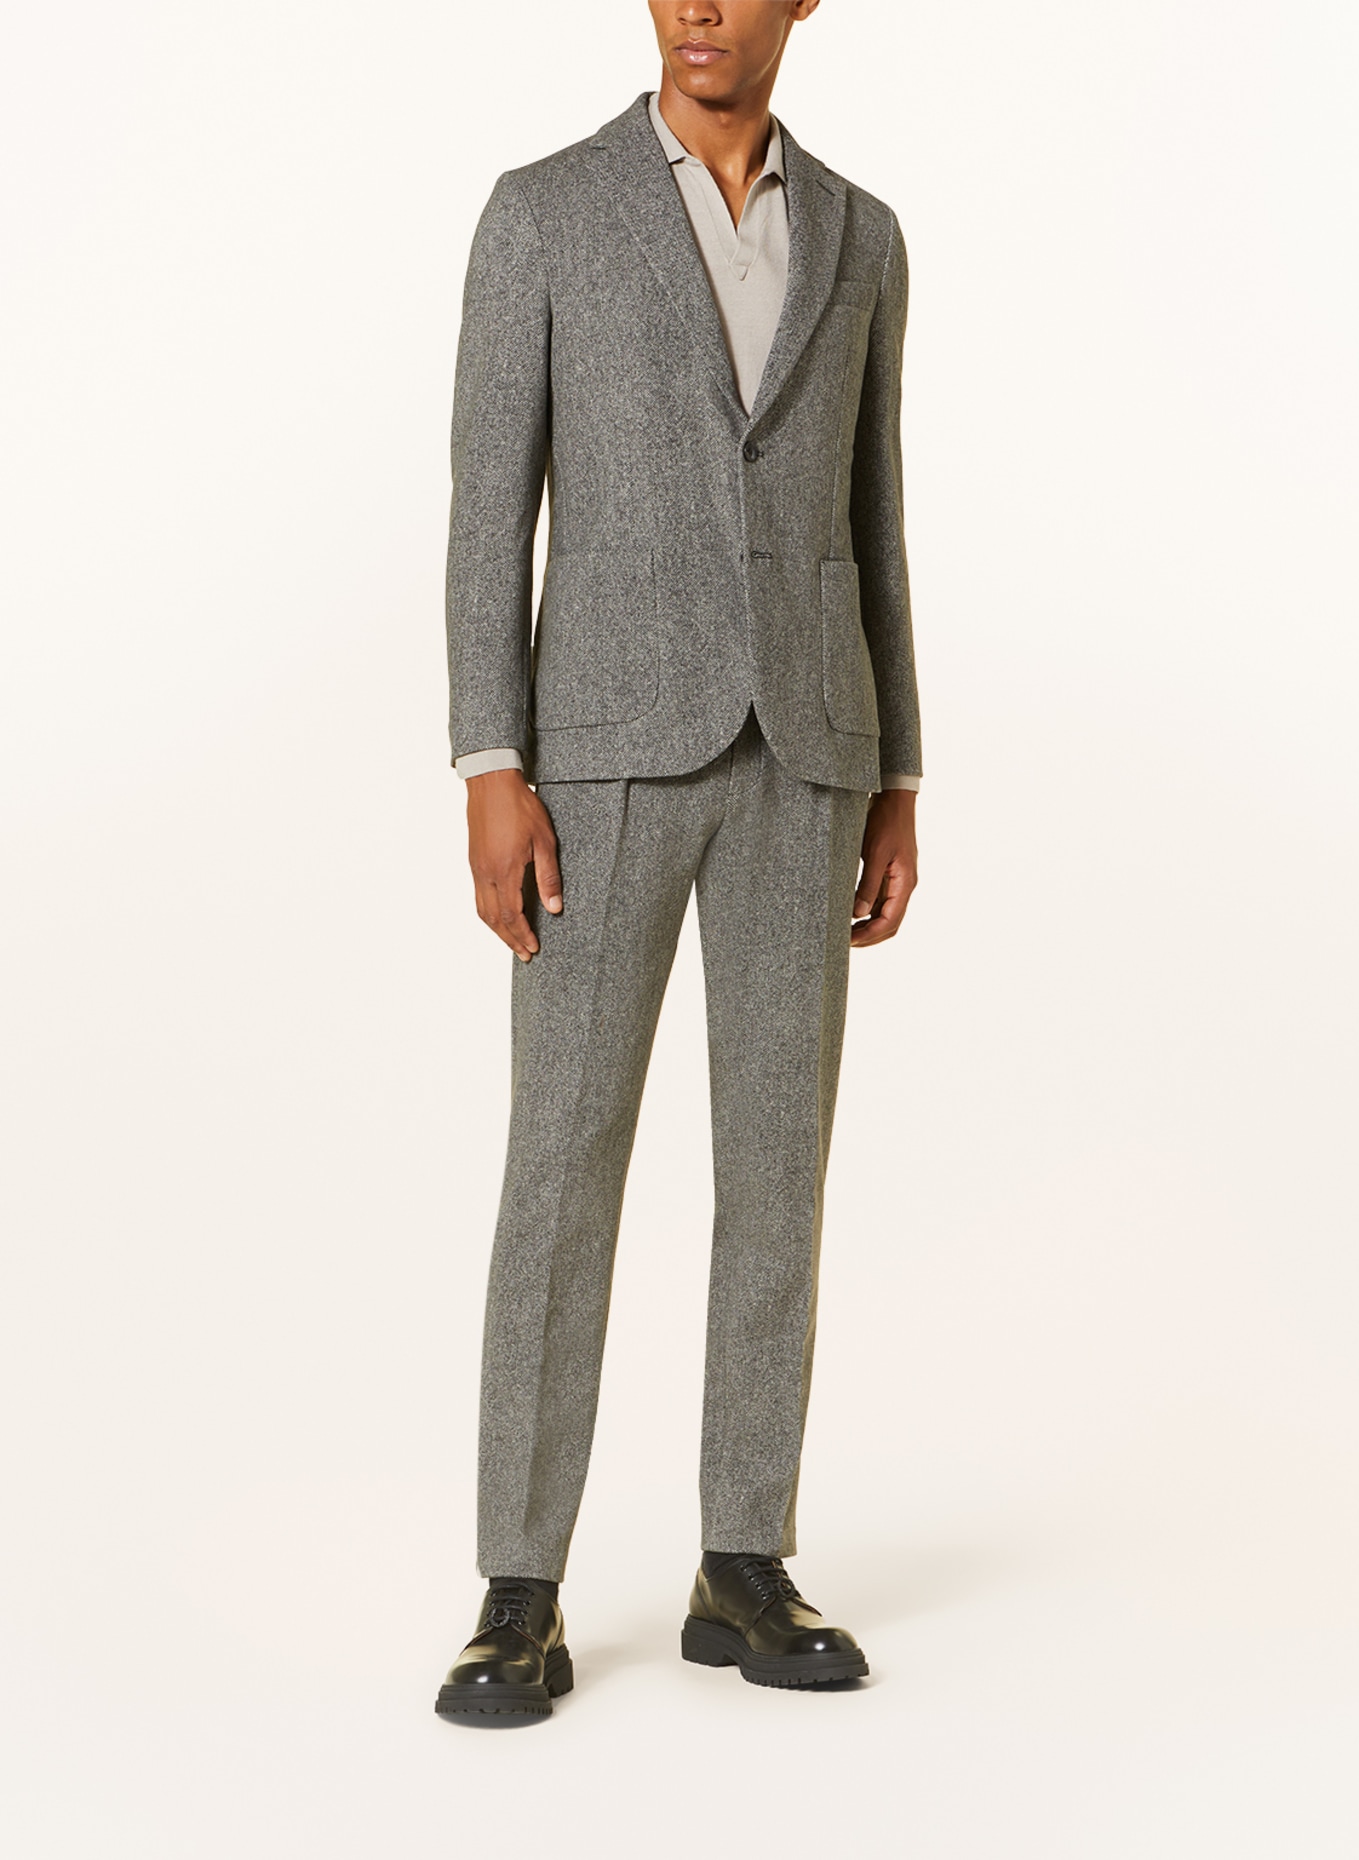 CIRCOLO 1901 Suit jacket extra slim fit made of jersey, Color: CARBO CARBONE-L (Image 2)